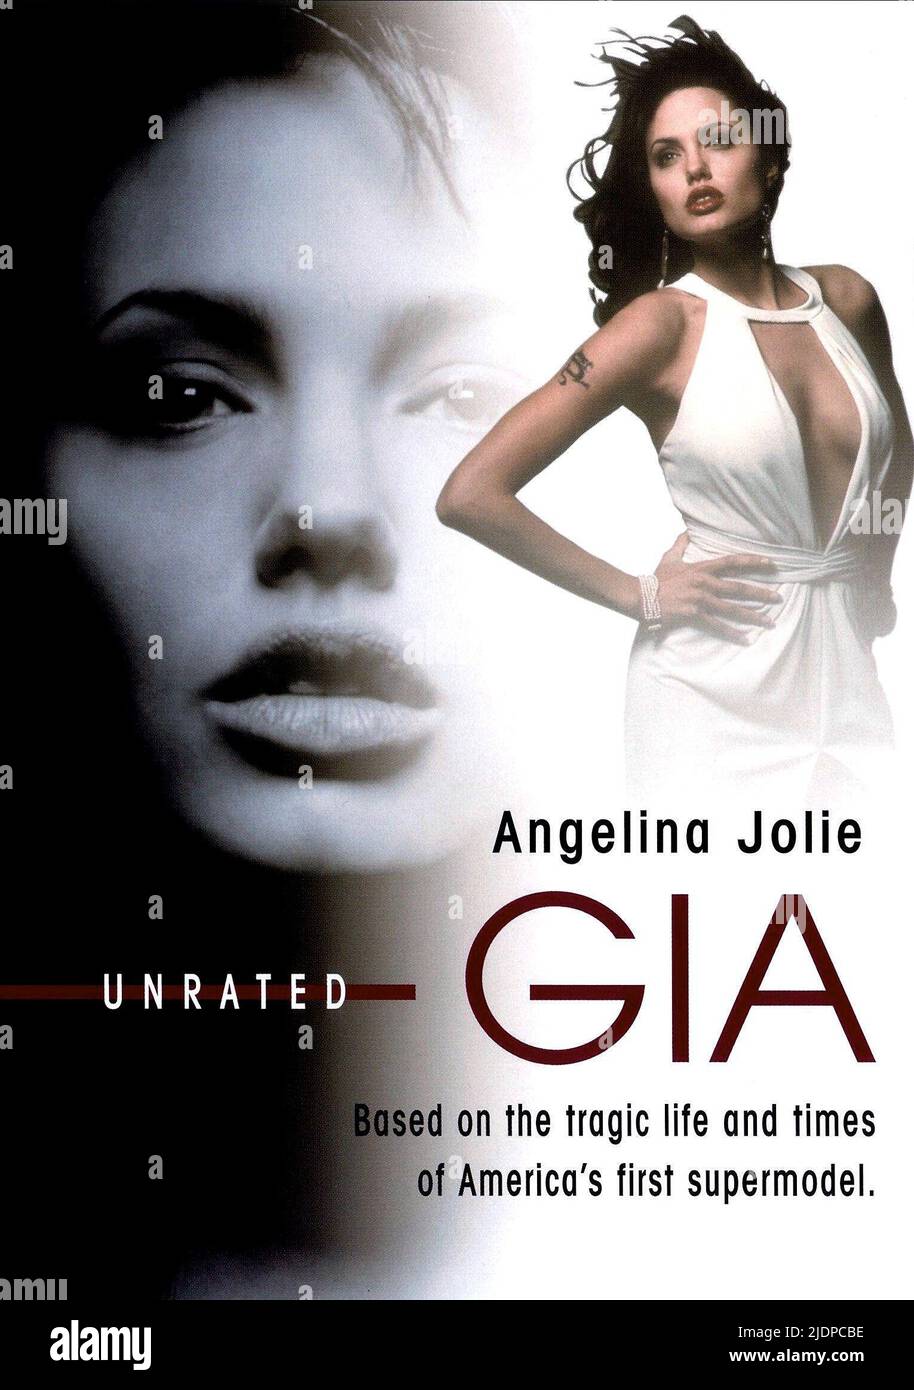 Angelina Jolie Movies List With Poster